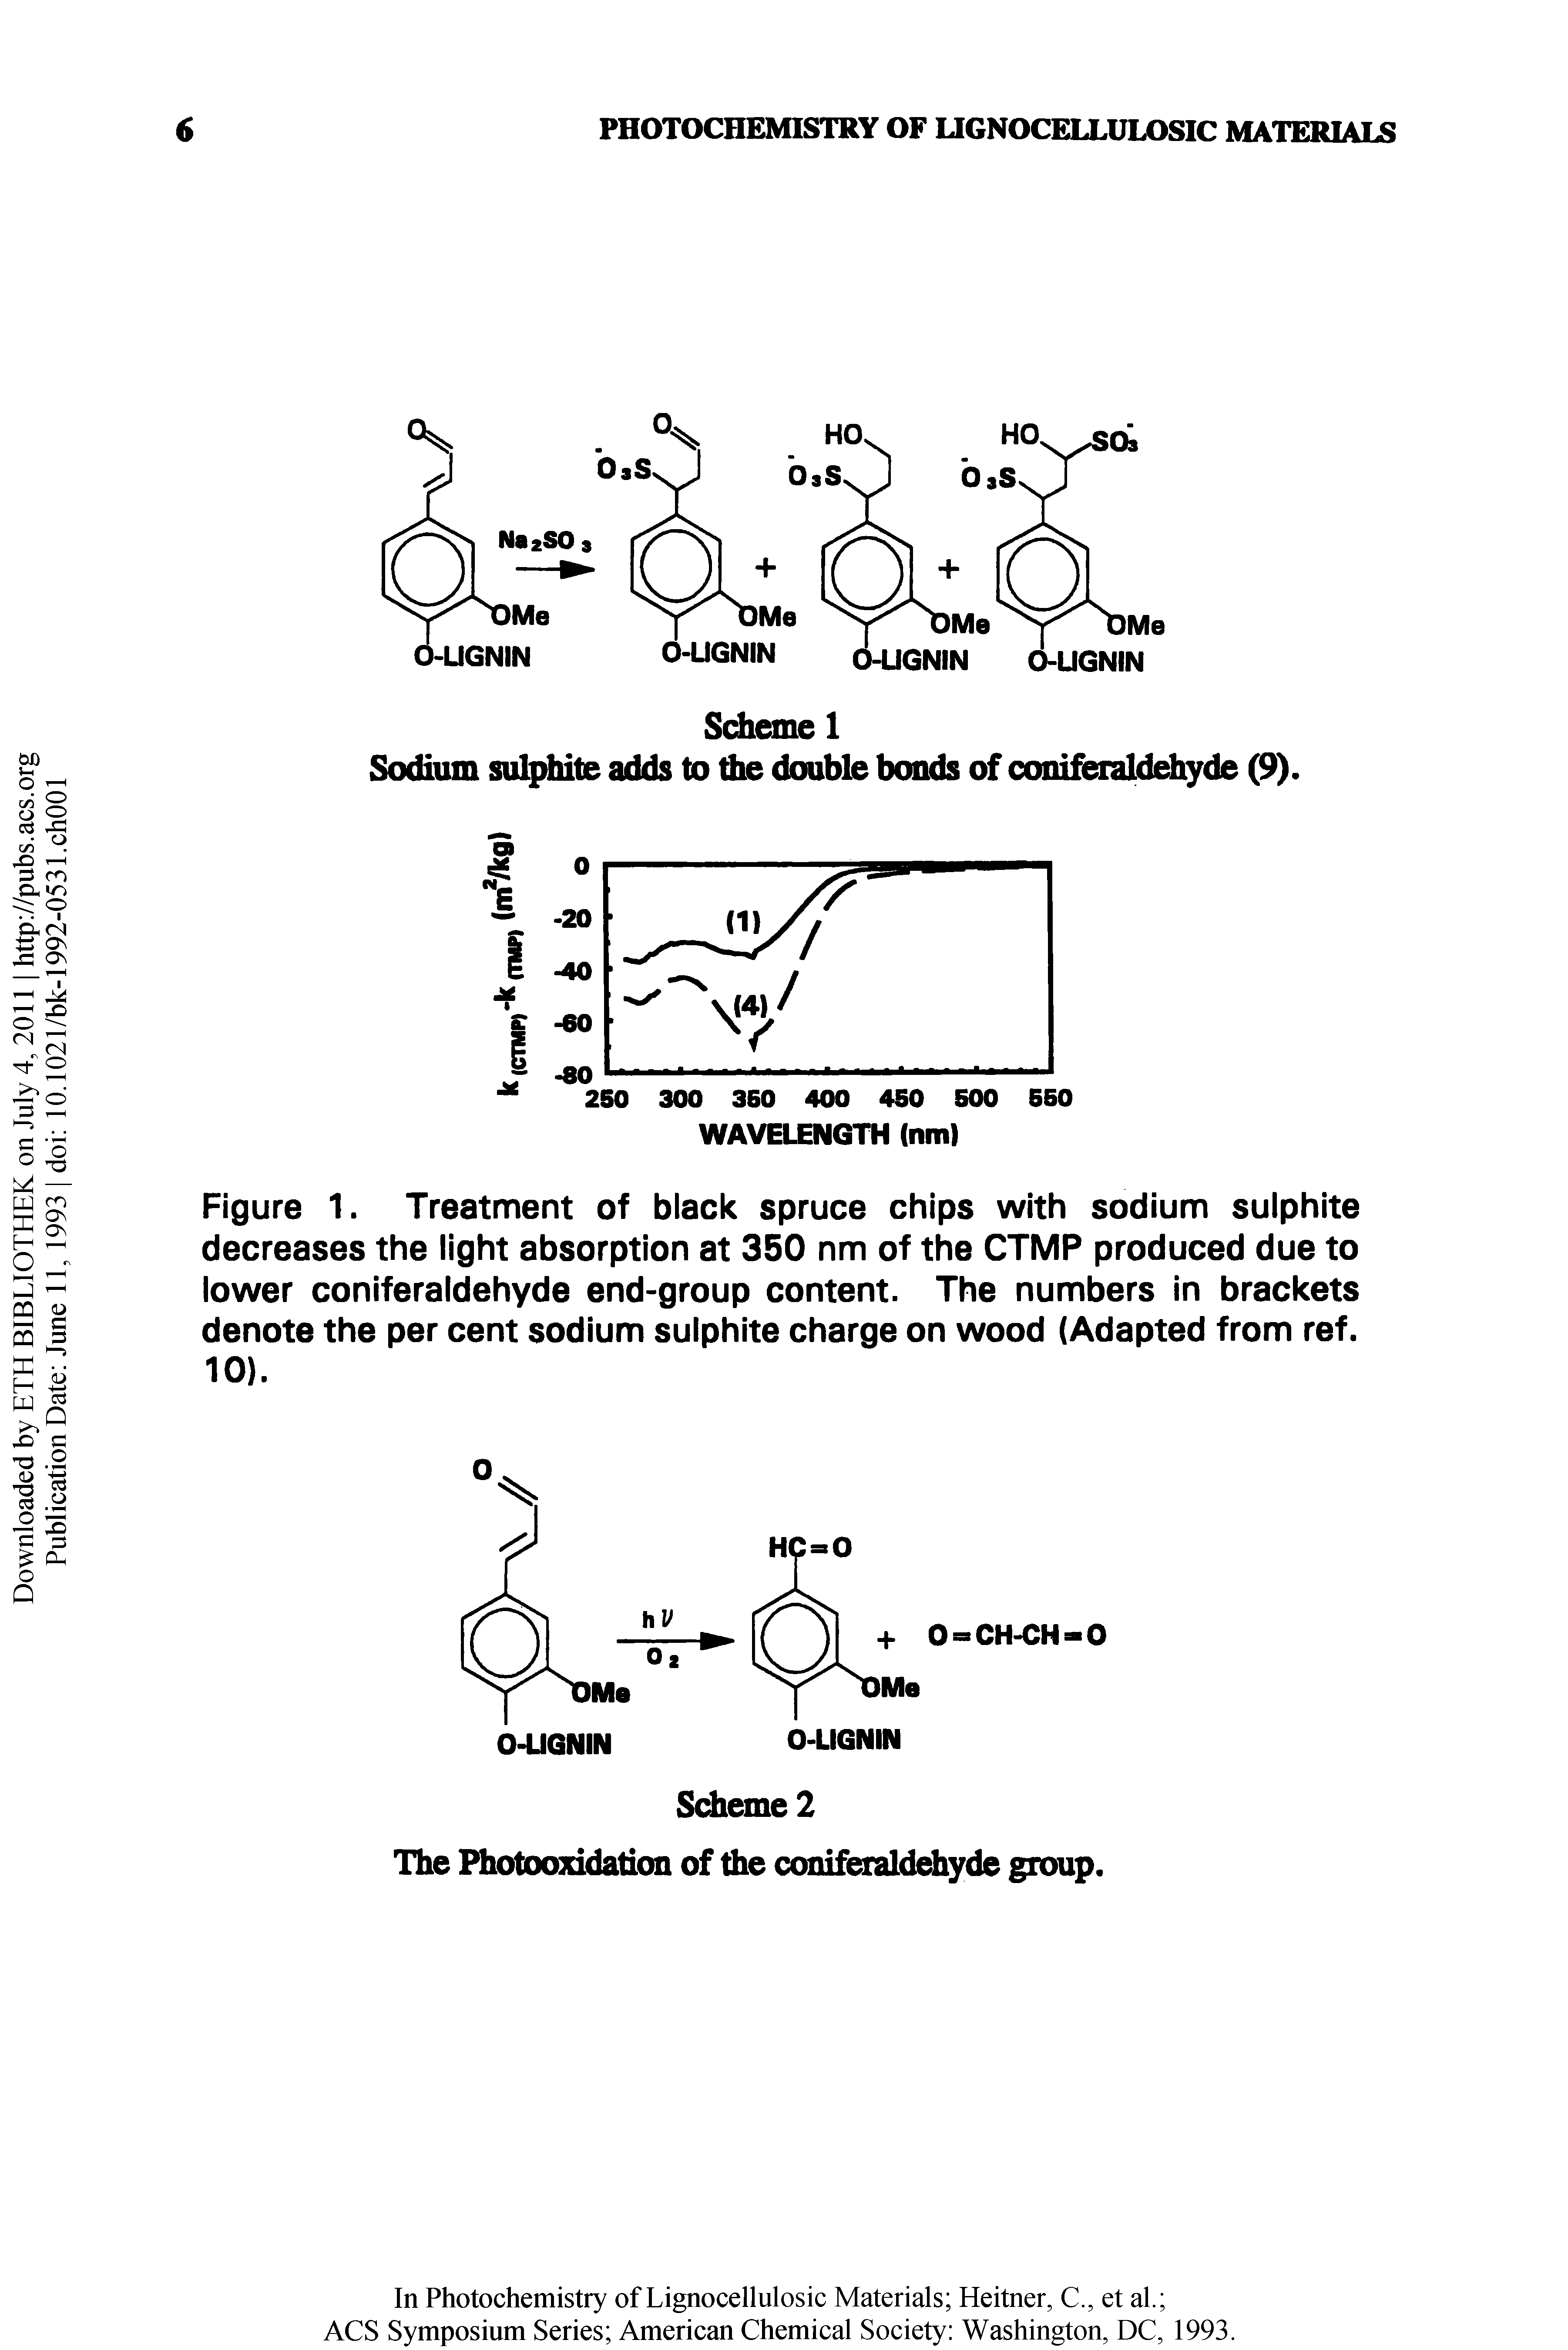 Figure 1. Treatment of black spruce chips with sodium sulphite decreases the light absorption at 350 nm of the CTMP produced due to lower coniferaldehyde end-group content. The numbers in brackets denote the per cent sodium sulphite charge on wood (Adapted from ref. 10).